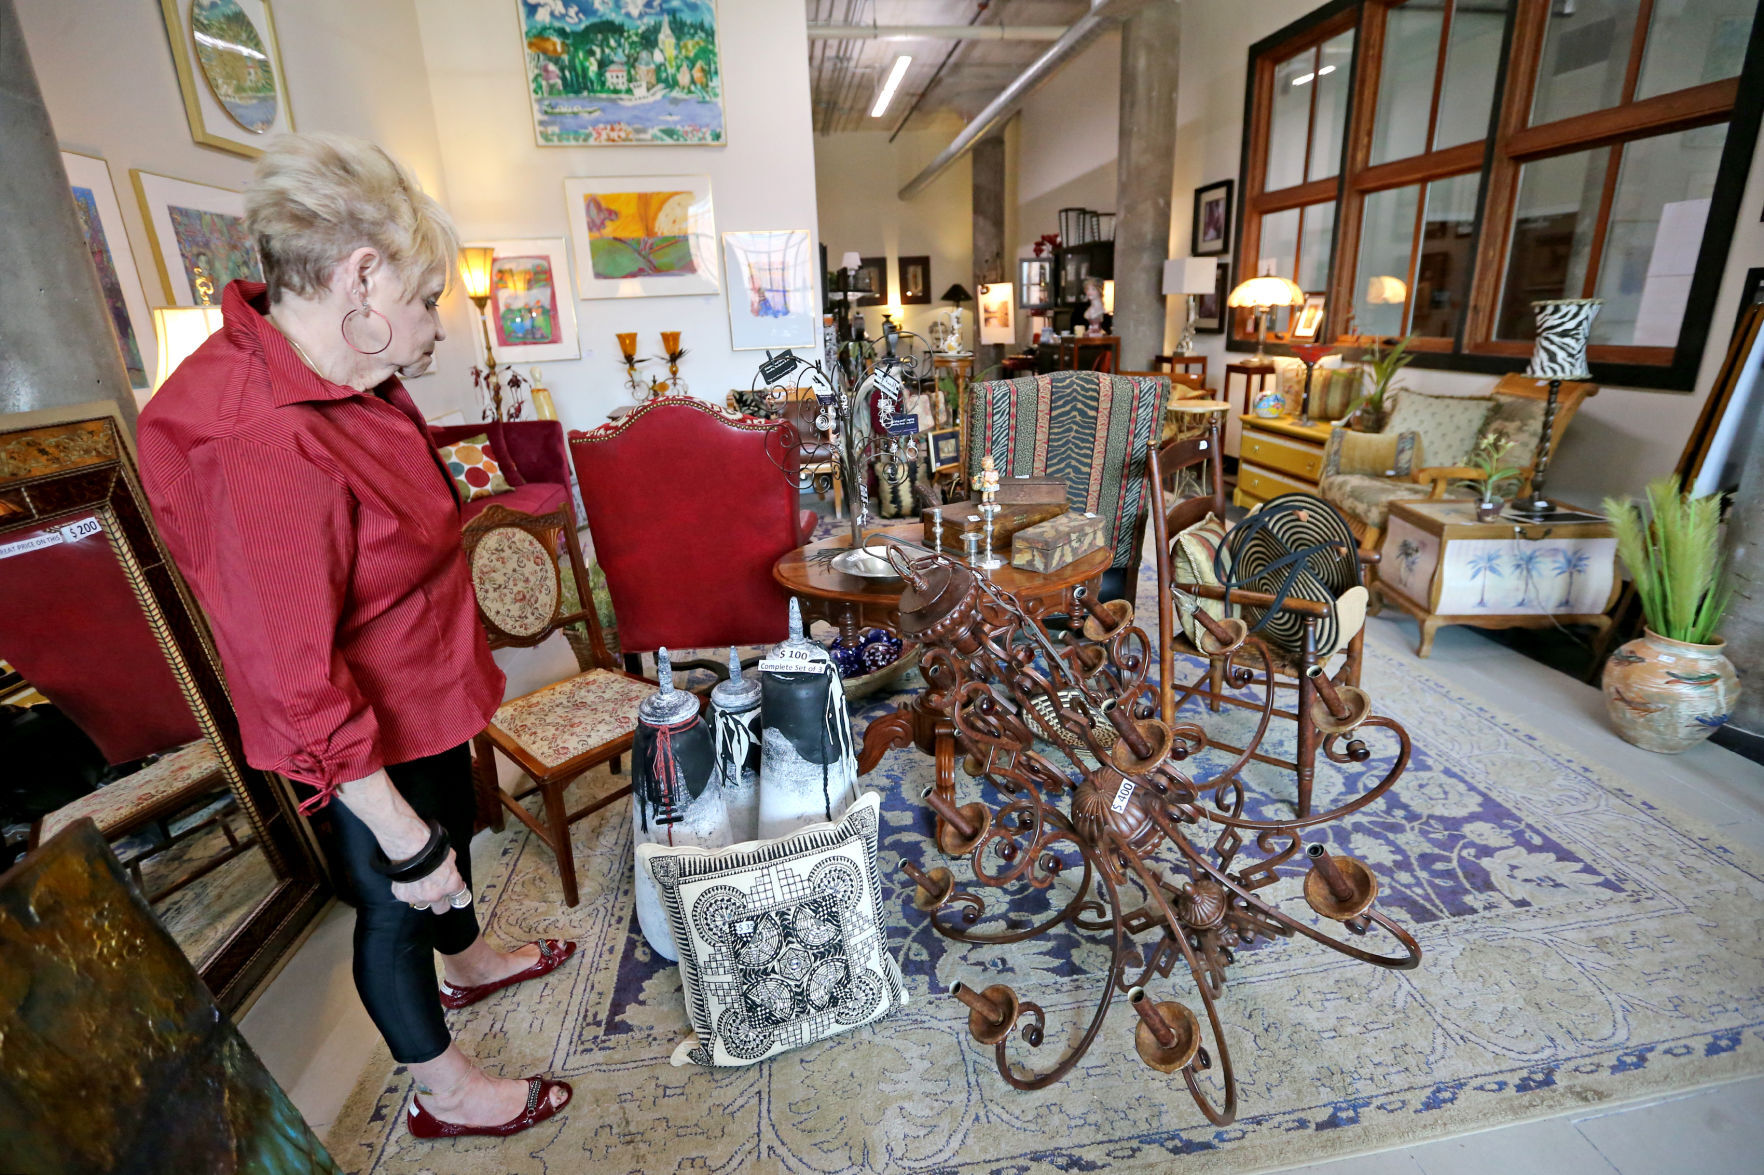 Carol Bush, of East Dubuque, Ill., browses items at The Consignment Store in the Novelty Iron Works building in Dubuque on Friday, July 23, 2021.    PHOTO CREDIT: JESSICA REILLY